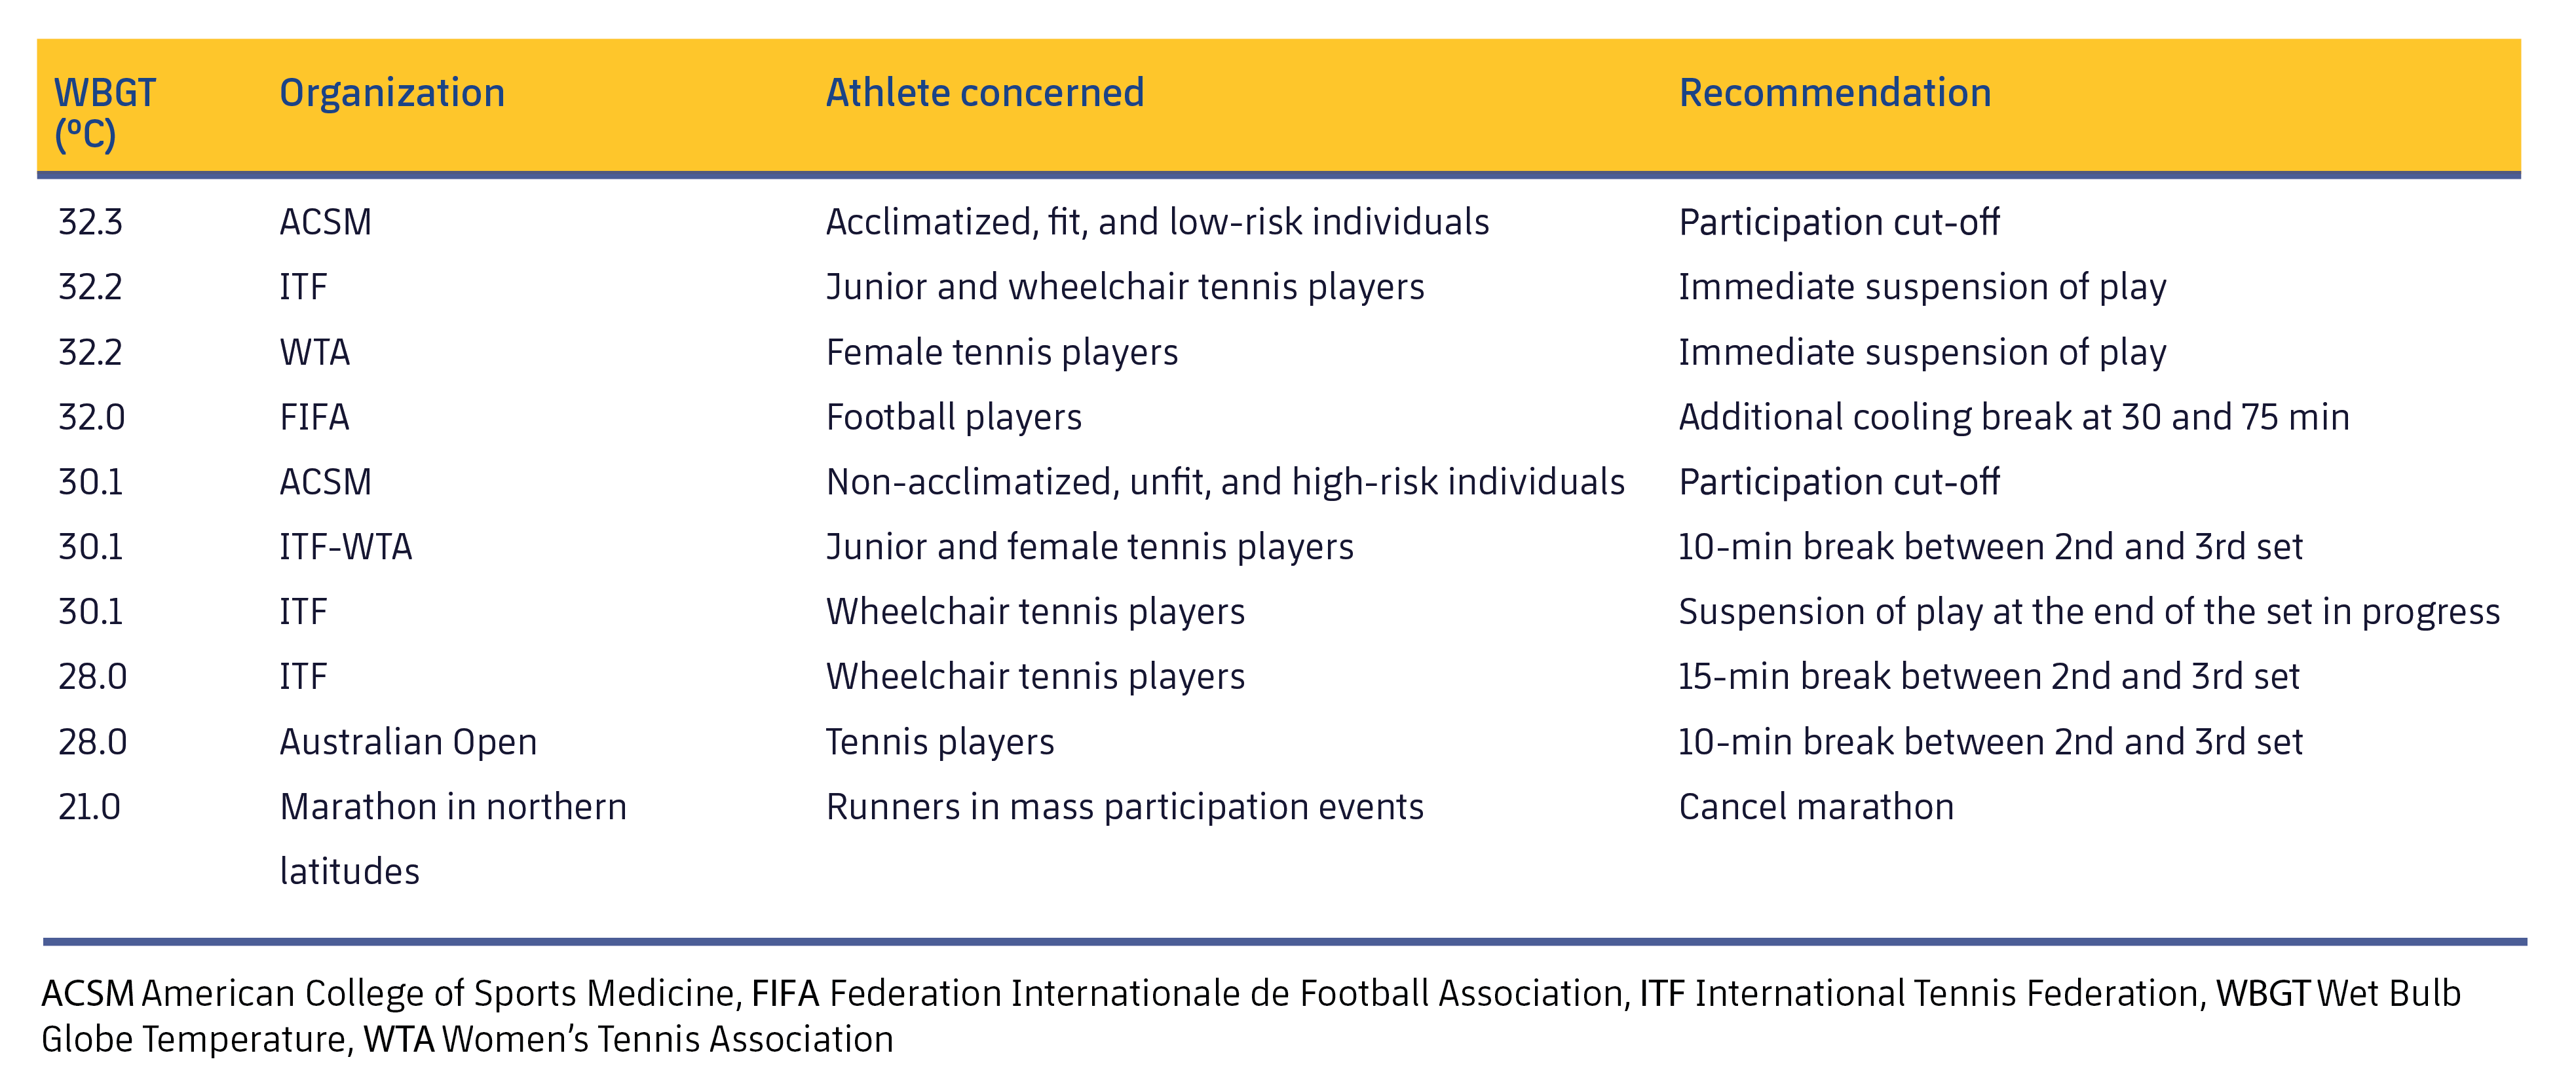 Figure 3. Action recommended by different sports entities according to the WBGT. Modified from Racinais et al. (2015).